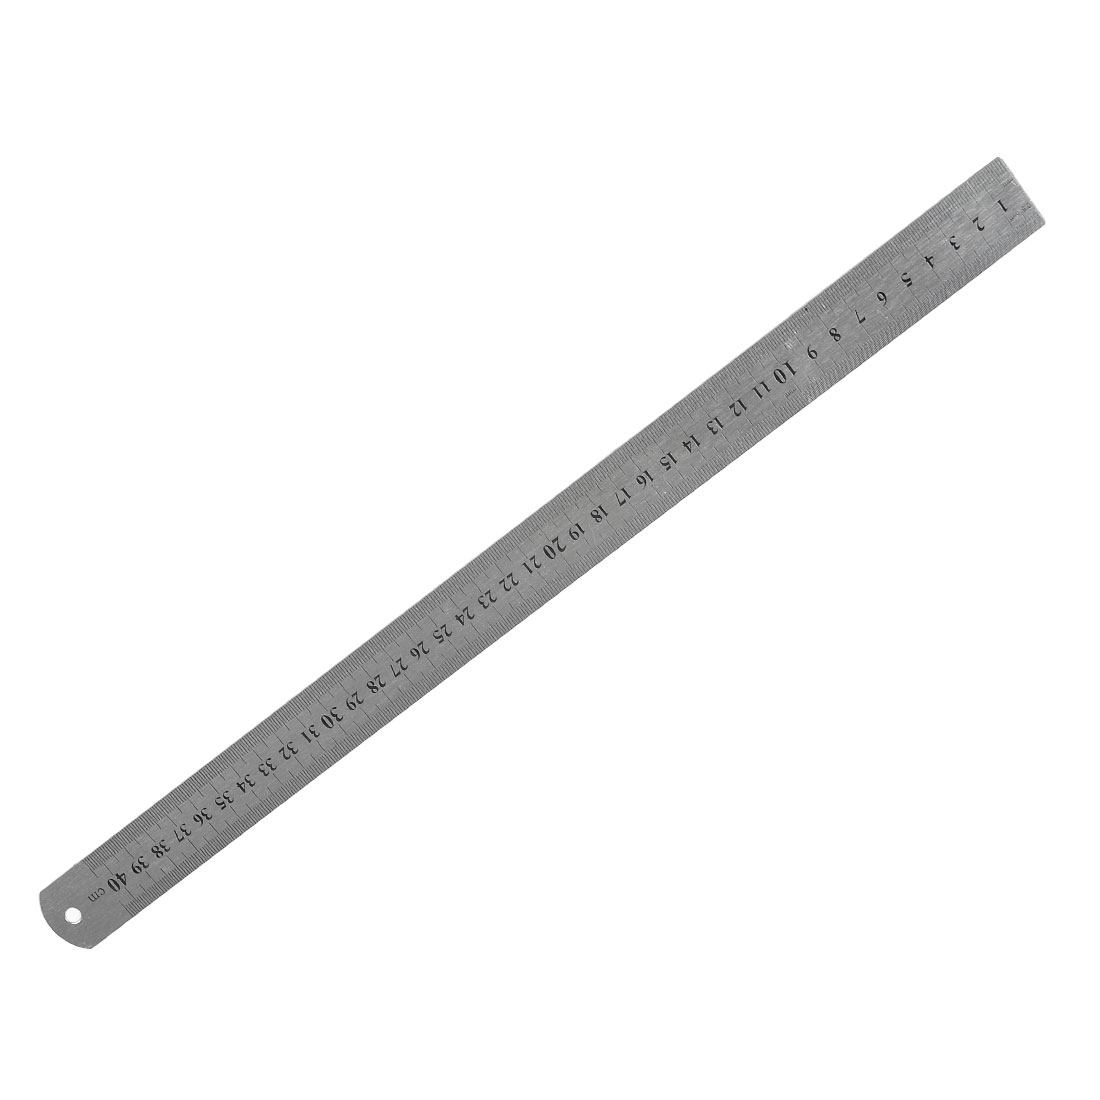 18 Images Of A Ruler Free Cliparts That You Can Download To You